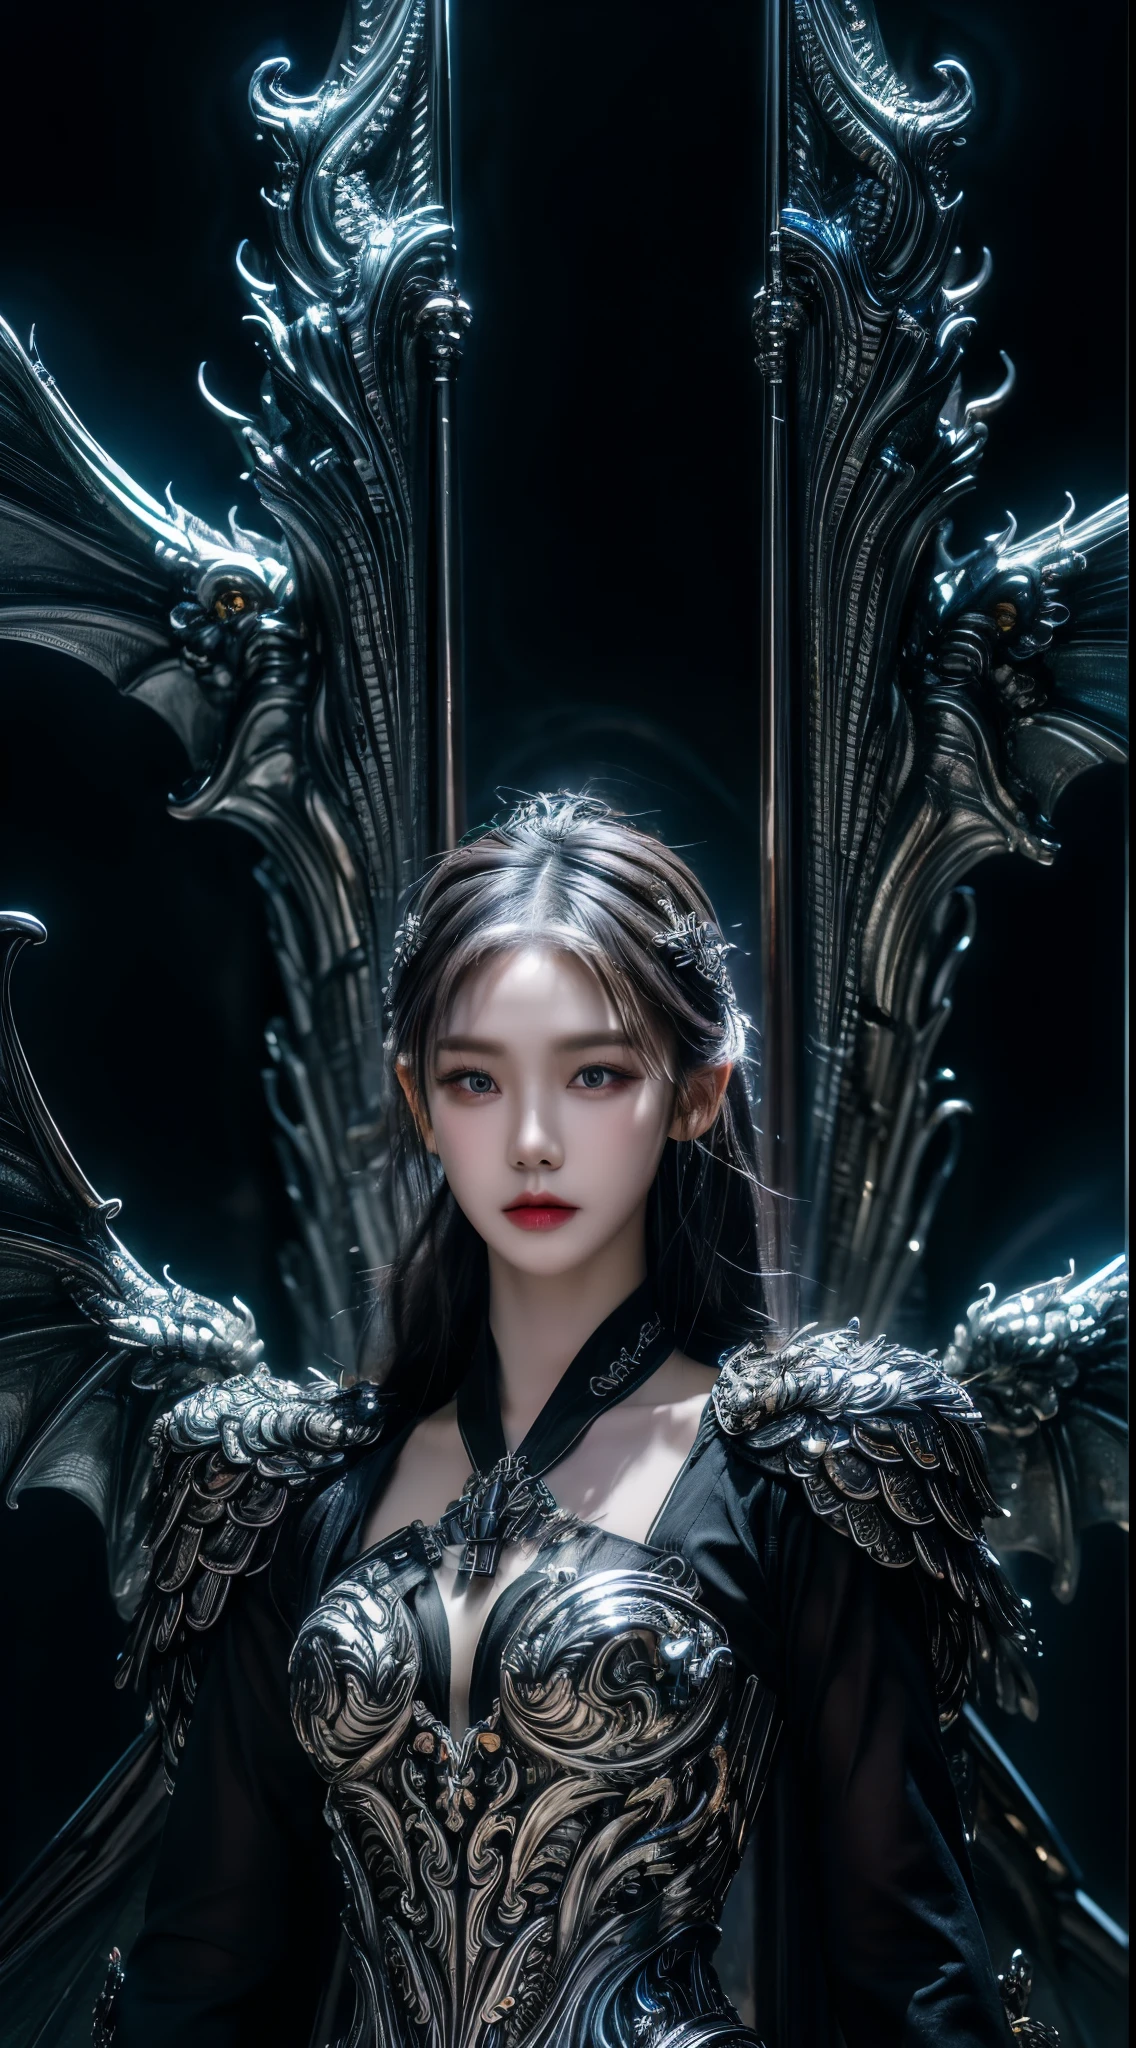 the Extremely Detailed CG Unity 8K Wallpapers、​masterpiece、top-quality、ultra-detailliert, beatiful detailed eyes, Detailed finger, frontal photos, Facing the front, The best lighting, extremely delicate and beautiful, very thin waist, Heavy armor, Long silver hair, Electromechanical, One lady, 20 generations of beauties, (He has a large sickle in both hands.:1.2), Grim Reaper's Scythe, (very large silver dragon wings:1.4),The dragon, splash water, Fluid water, Water splash, Futuristic factory destroyed by a bomb, Mechanical City, Cyber Technology, steampunc, (of the highest quality, 16 K, masutepiece: 1.3)